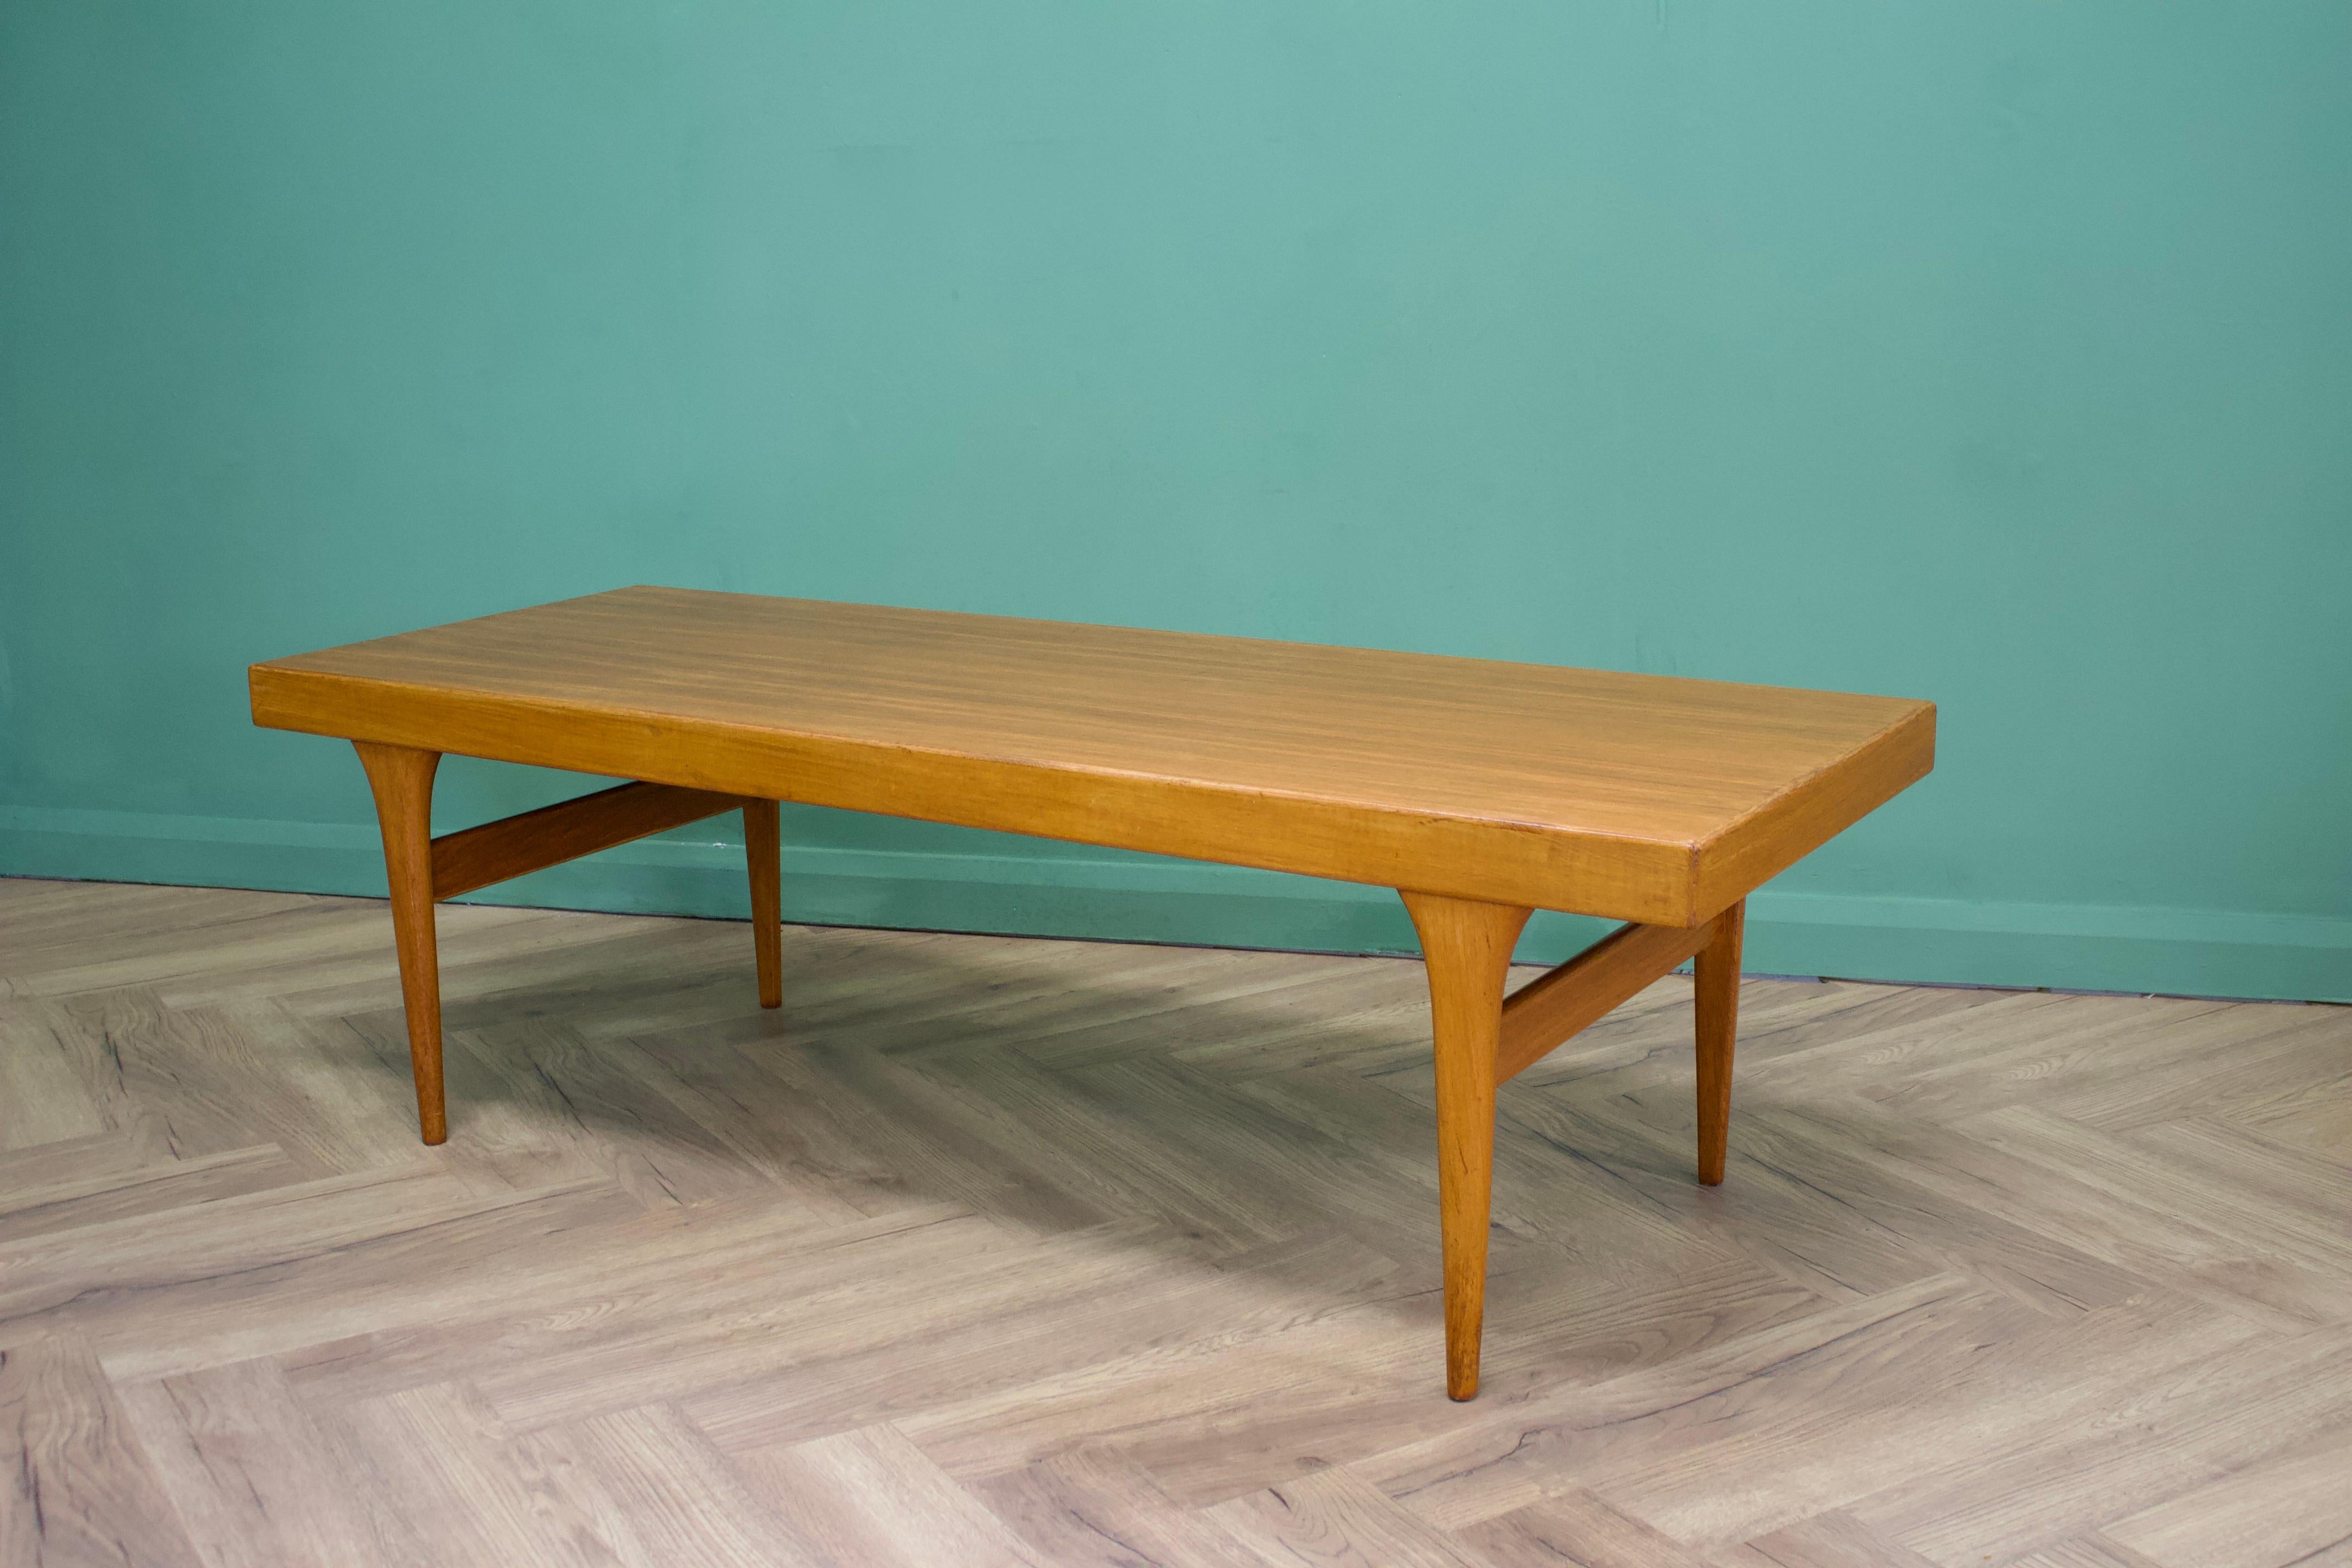 - Mid-century Danish Coffee Table
- Made by Silkeborg
- Made from teak.